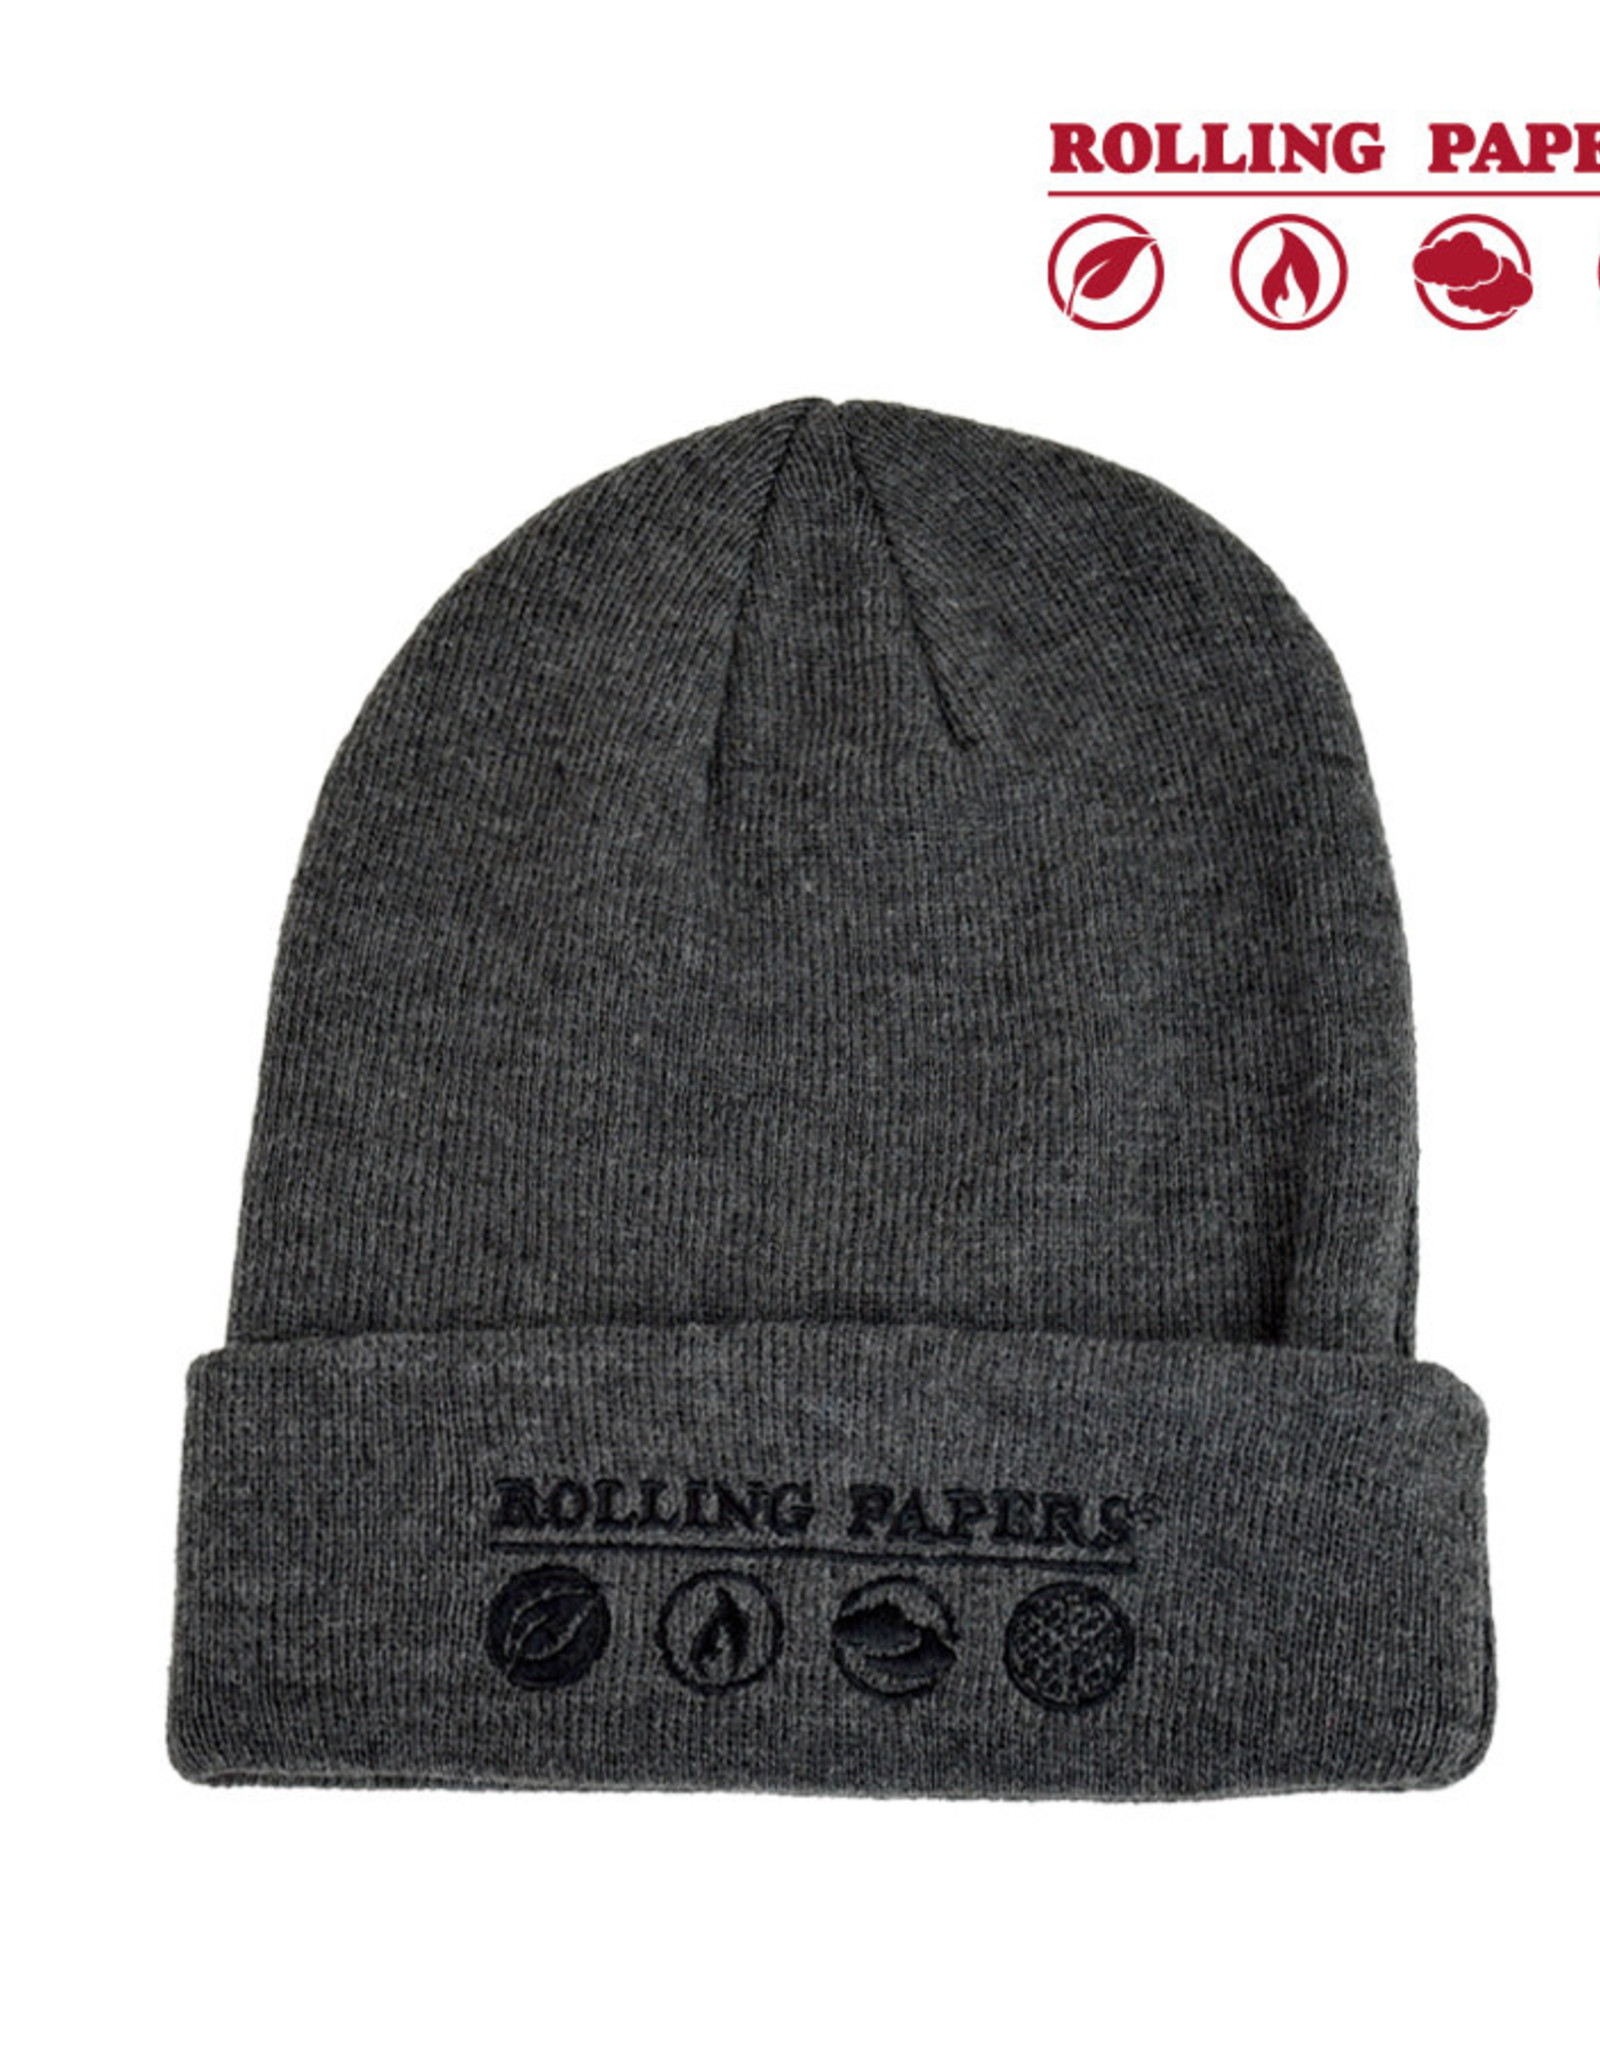 Rolling Papers Toque - Grey